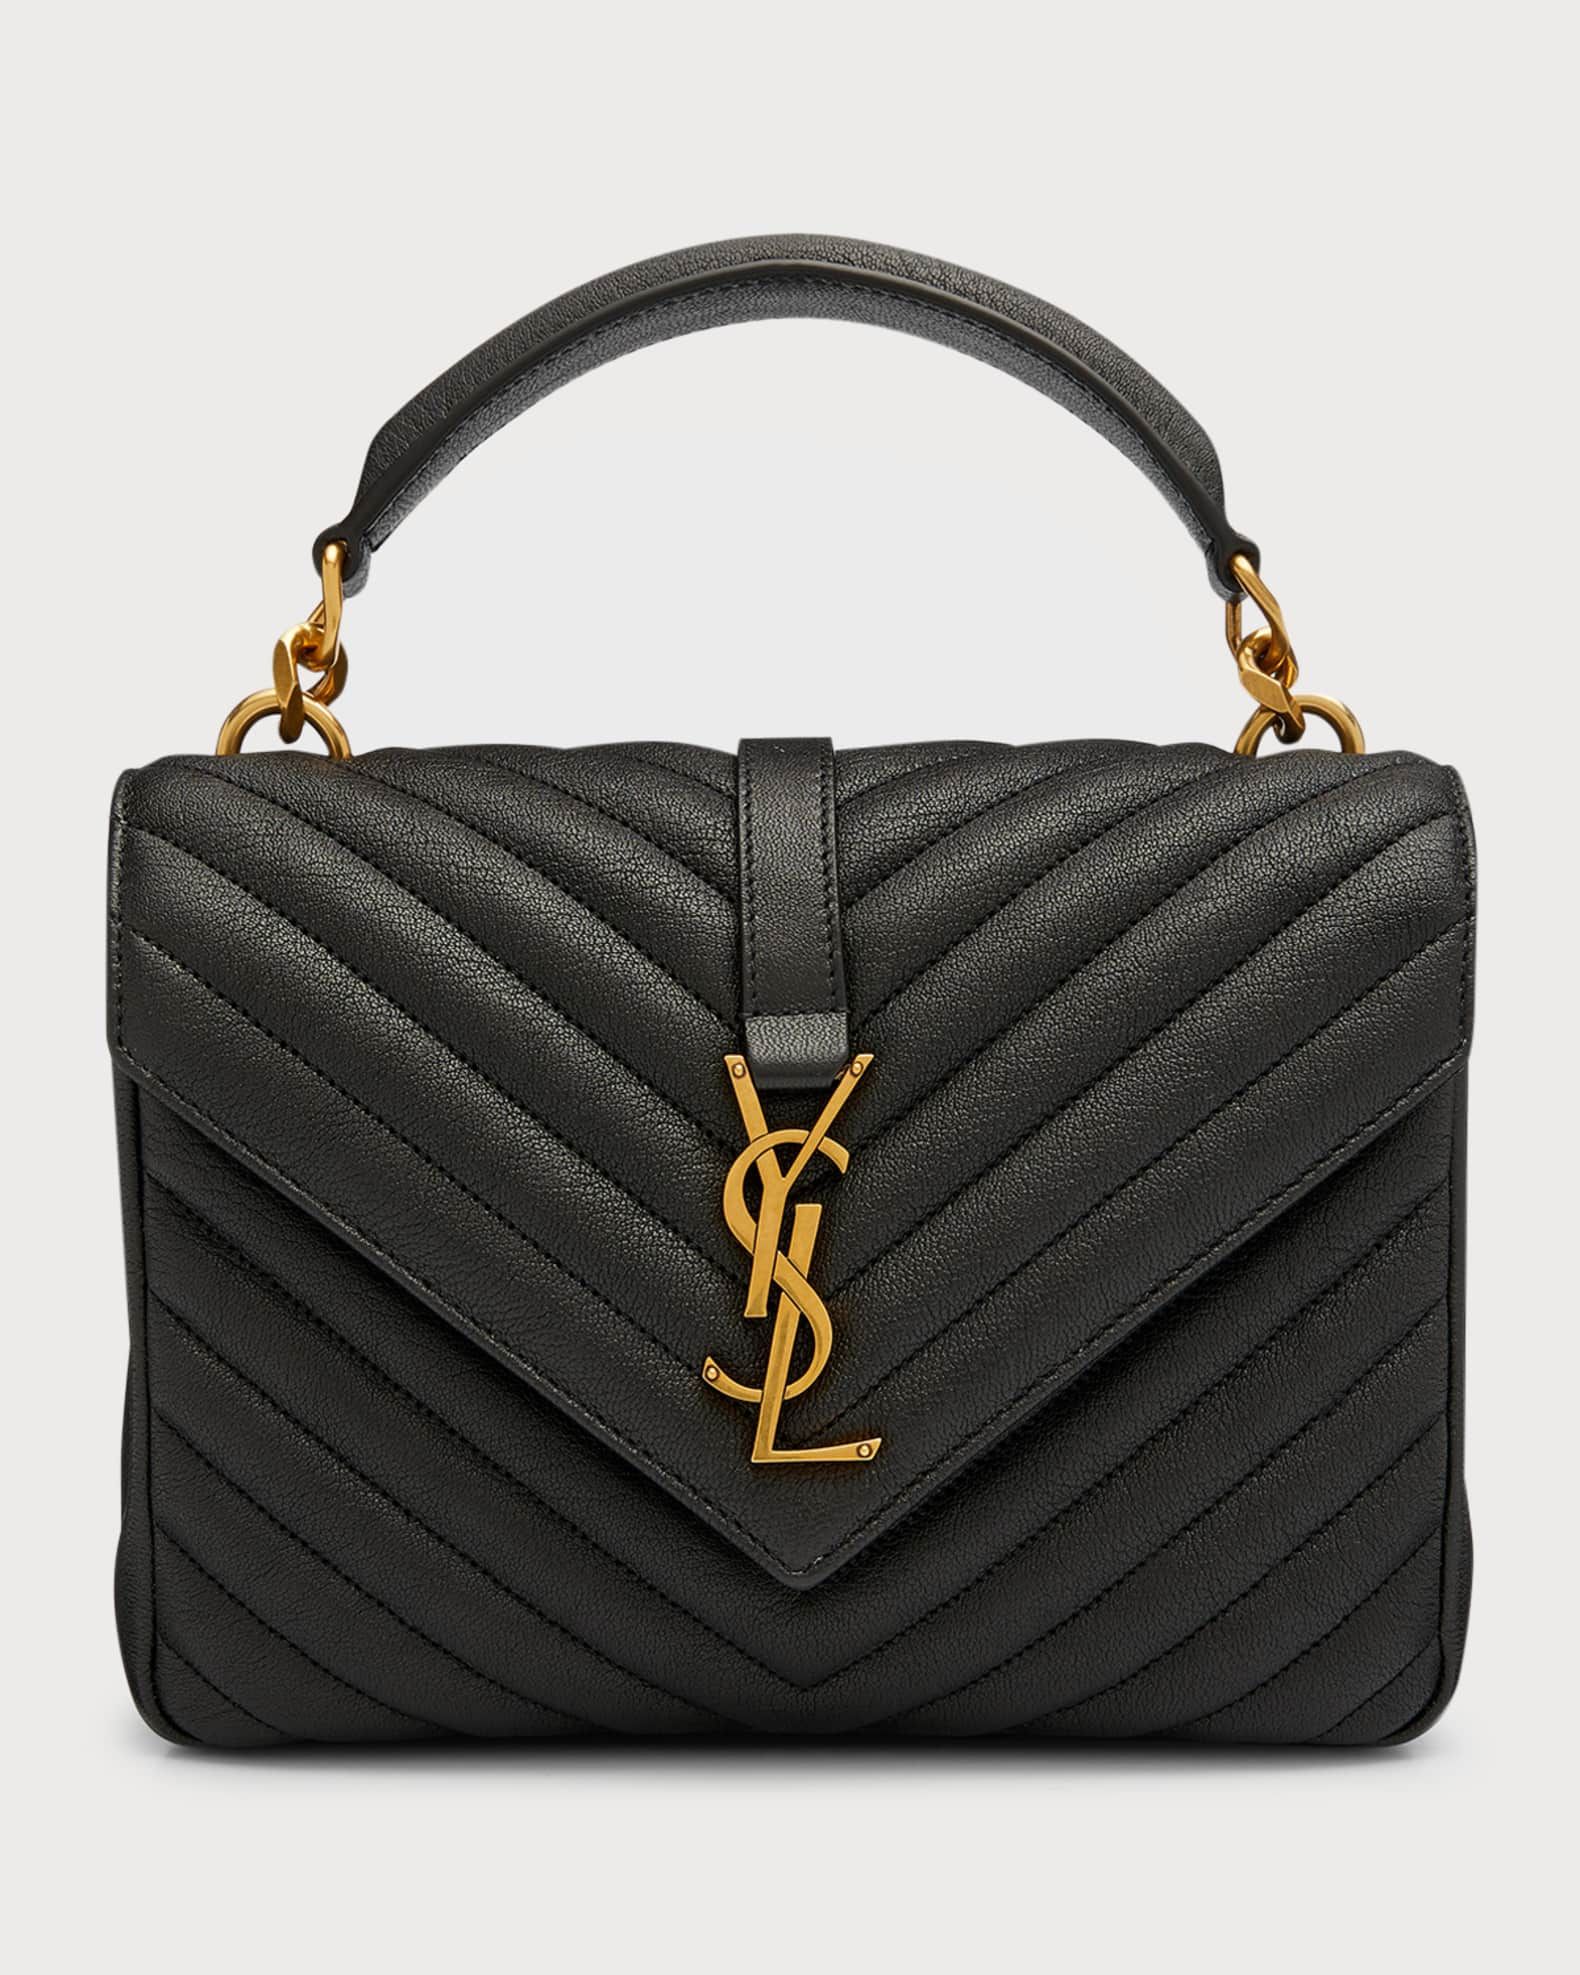 College Medium Flap YSL Shoulder Bag in Quilted Leather | Neiman Marcus